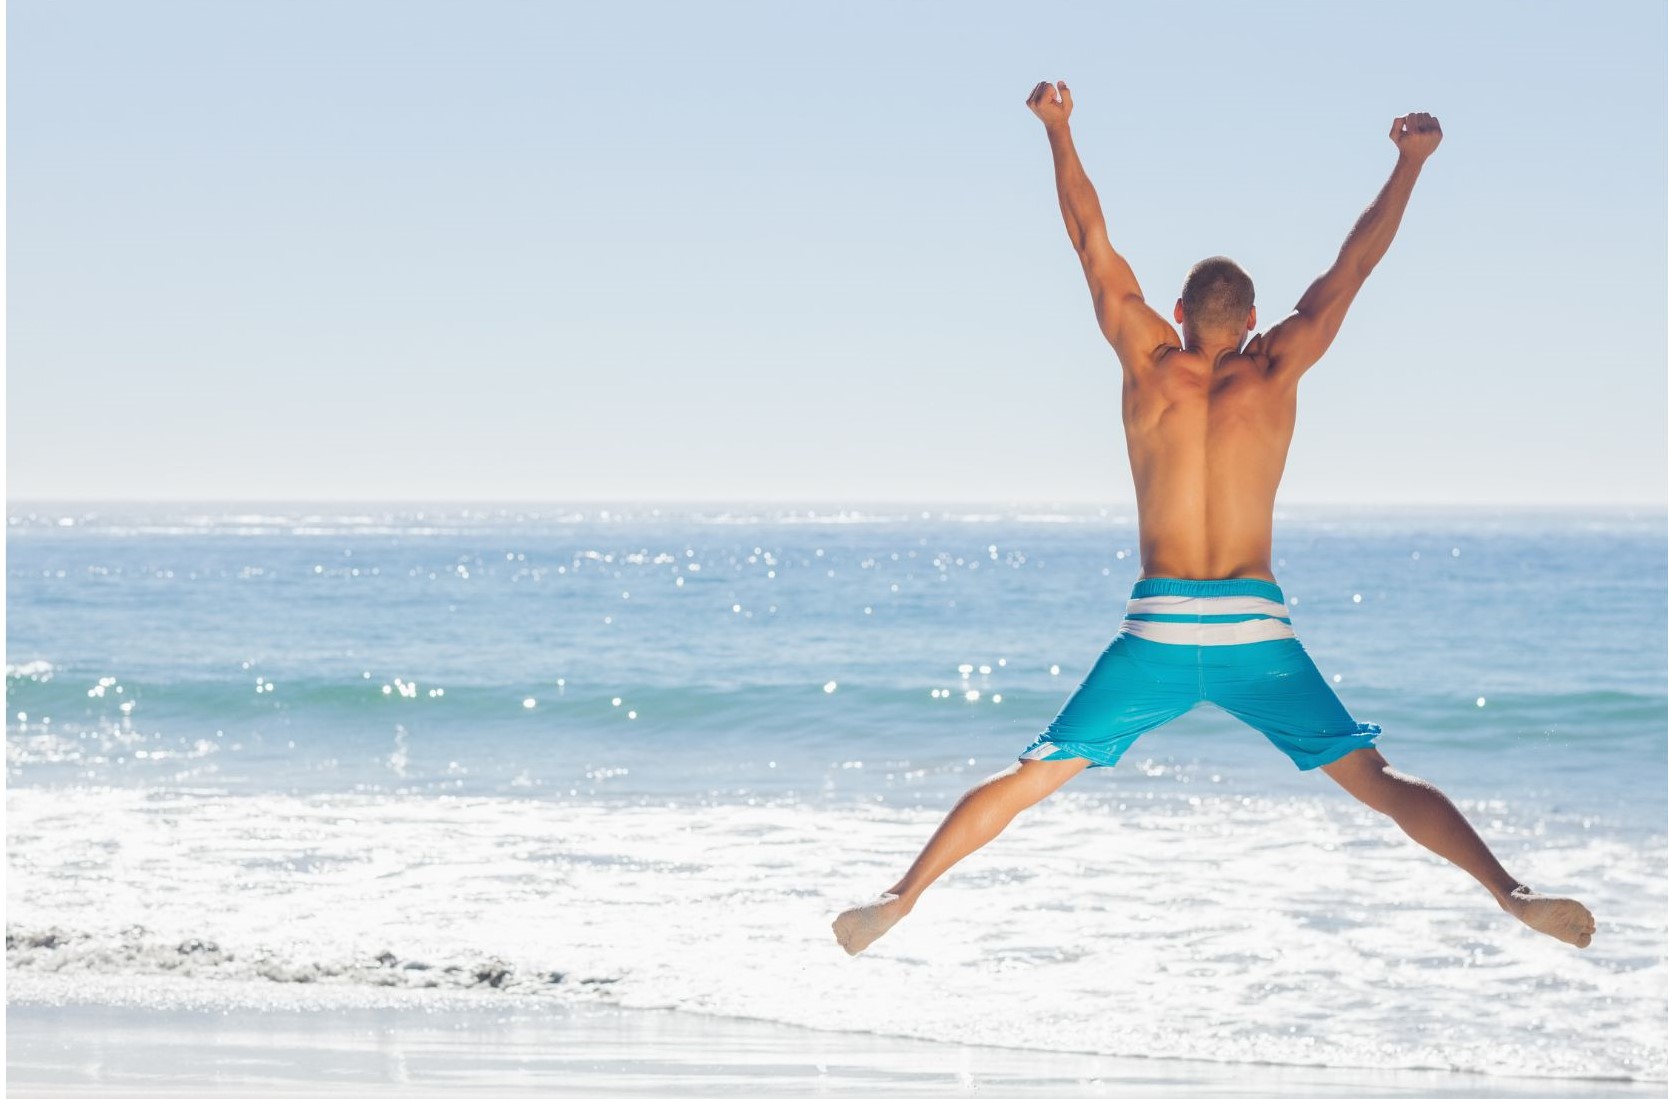 With permanent laser hair removal, men no longer have to worry about back hair at the beach.